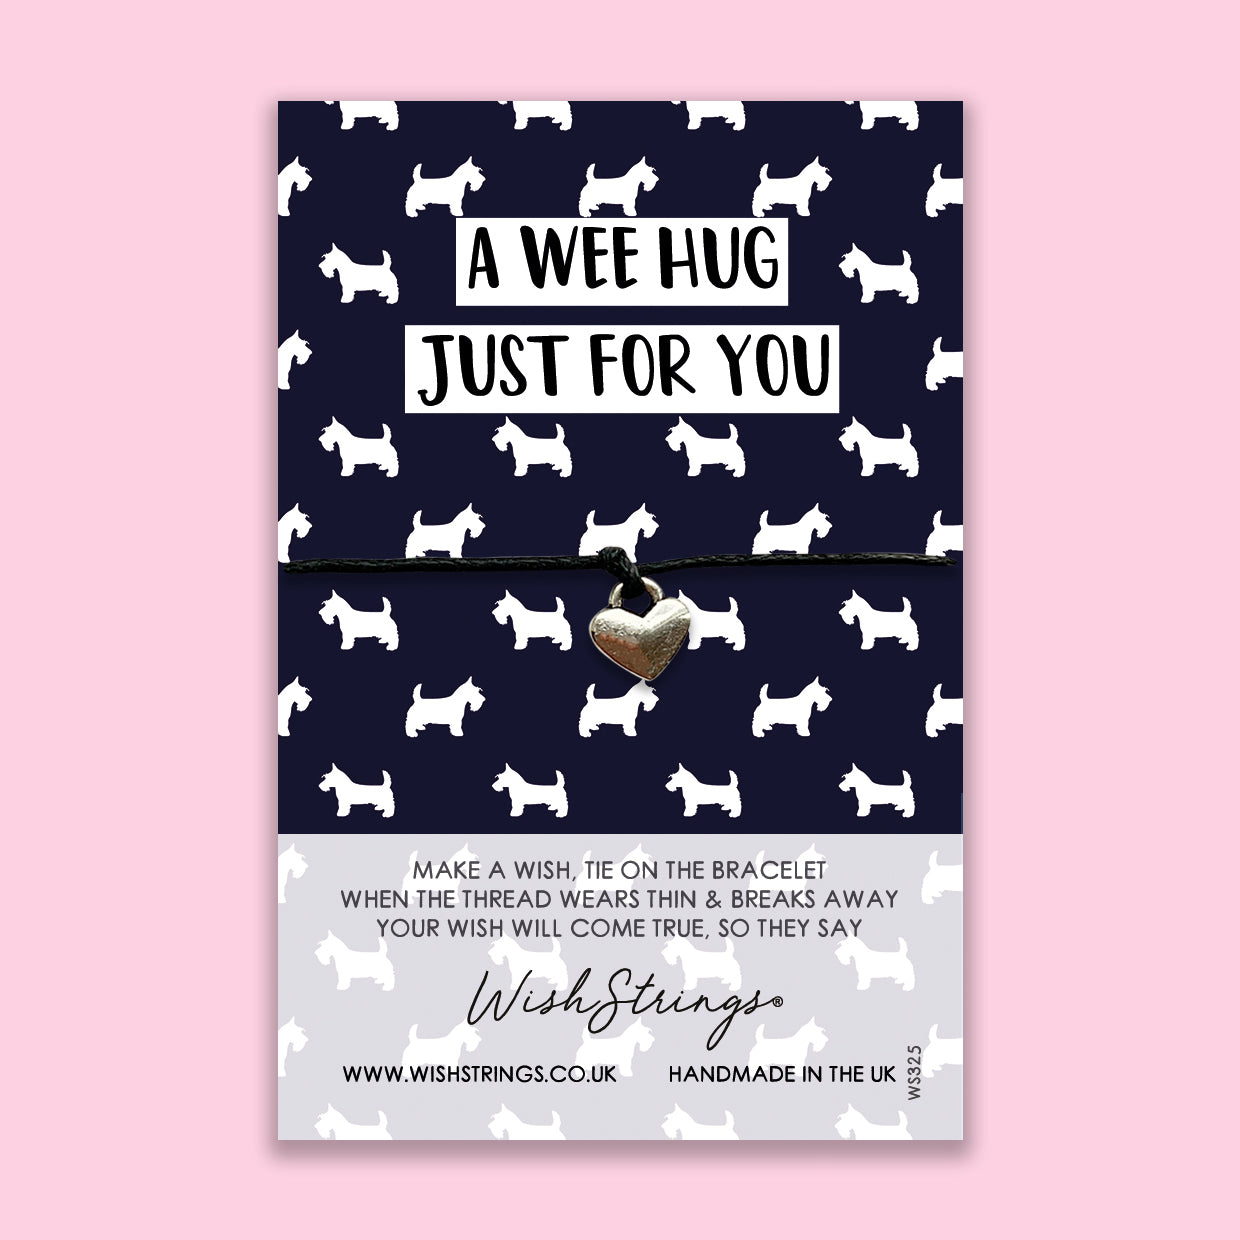 A Wee Hug Just for You - WishStrings Wish Bracelet